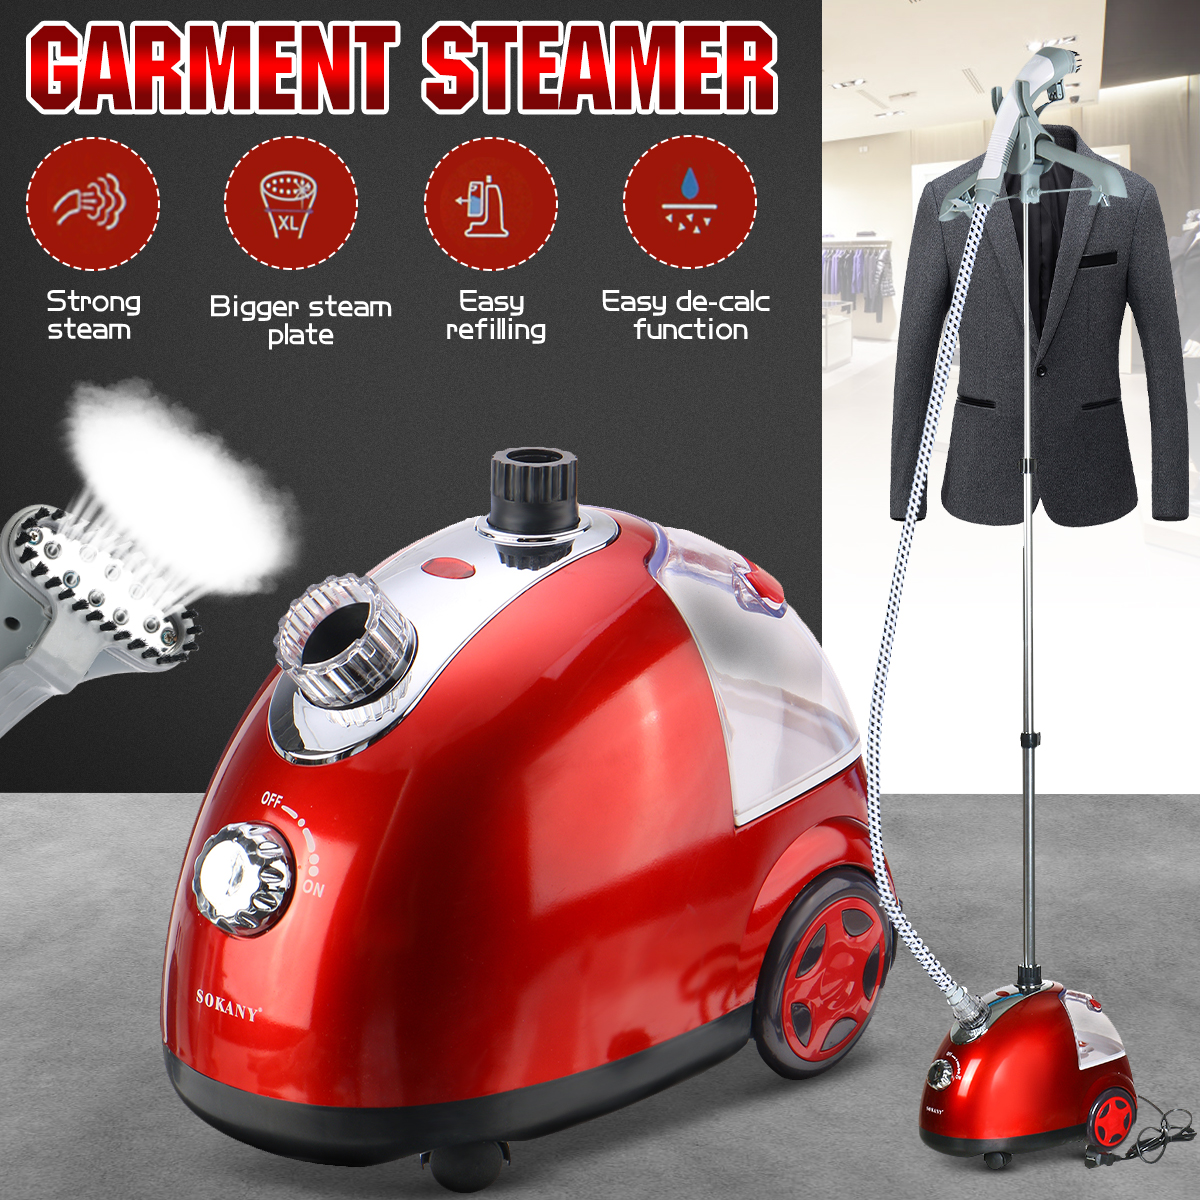 SOKANY-2000W-Clothing-Garment-Steamer-Portable-Fabric-Steamer-Vertical-Iron-Machine-for-Clothes-with-1937409-2